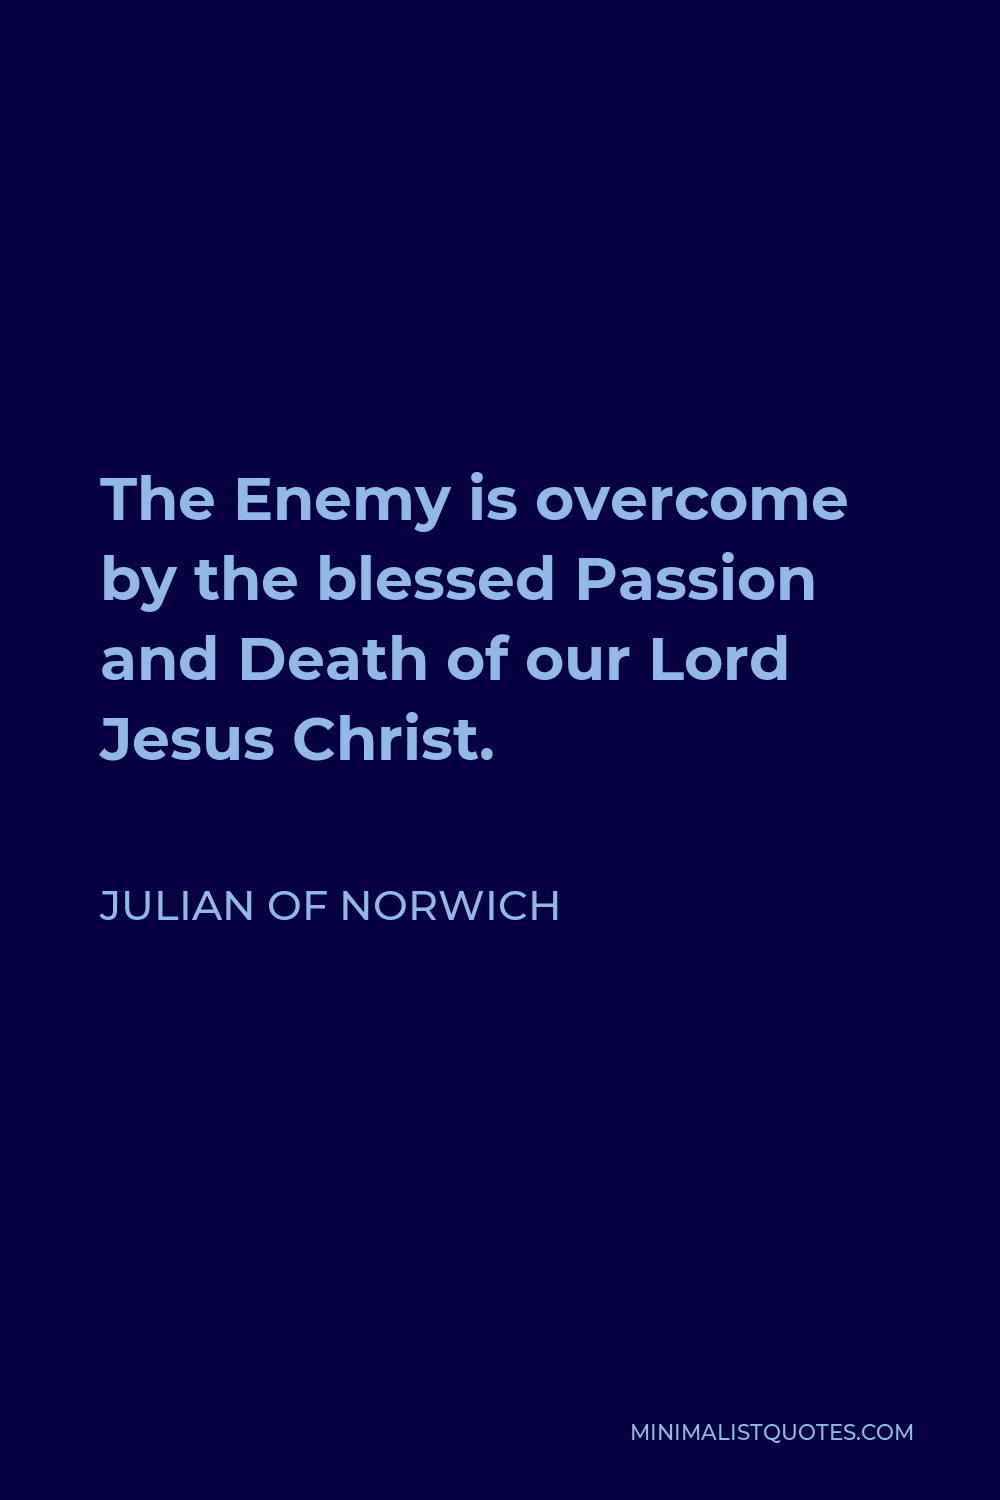 Julian of Norwich Quote - The Enemy is overcome by the blessed Passion and Death of our Lord Jesus Christ.